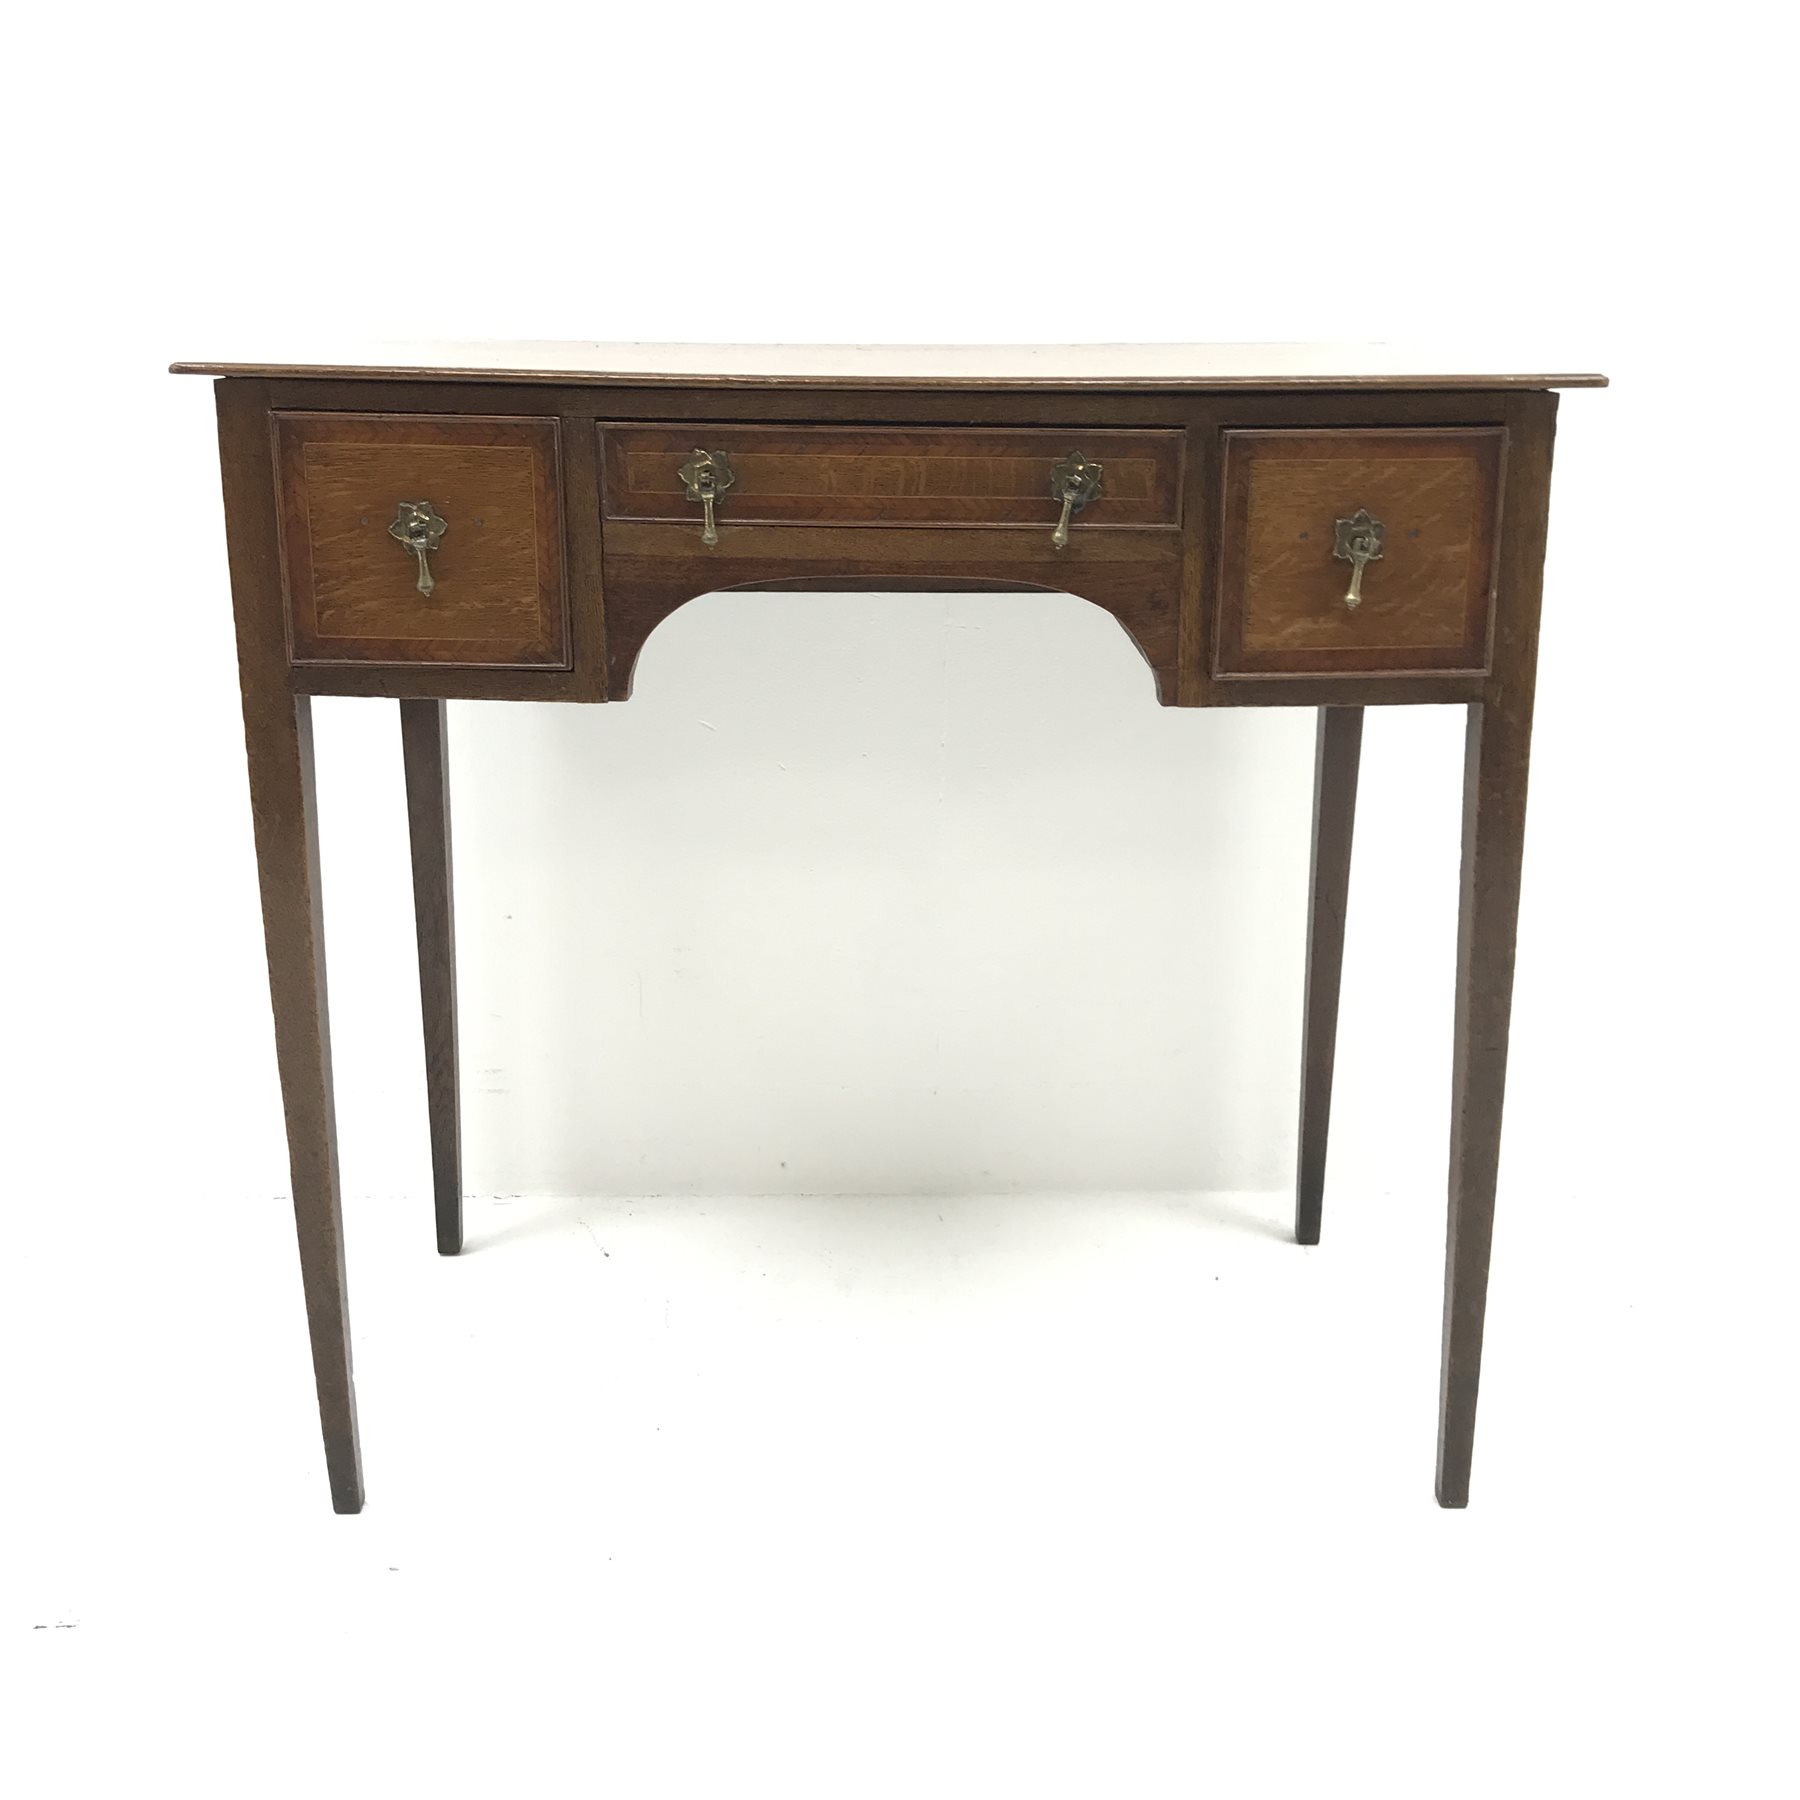 19th century inlaid and crossbanded oak lowboy side table, two short and one long drawer, square tap - Image 2 of 5